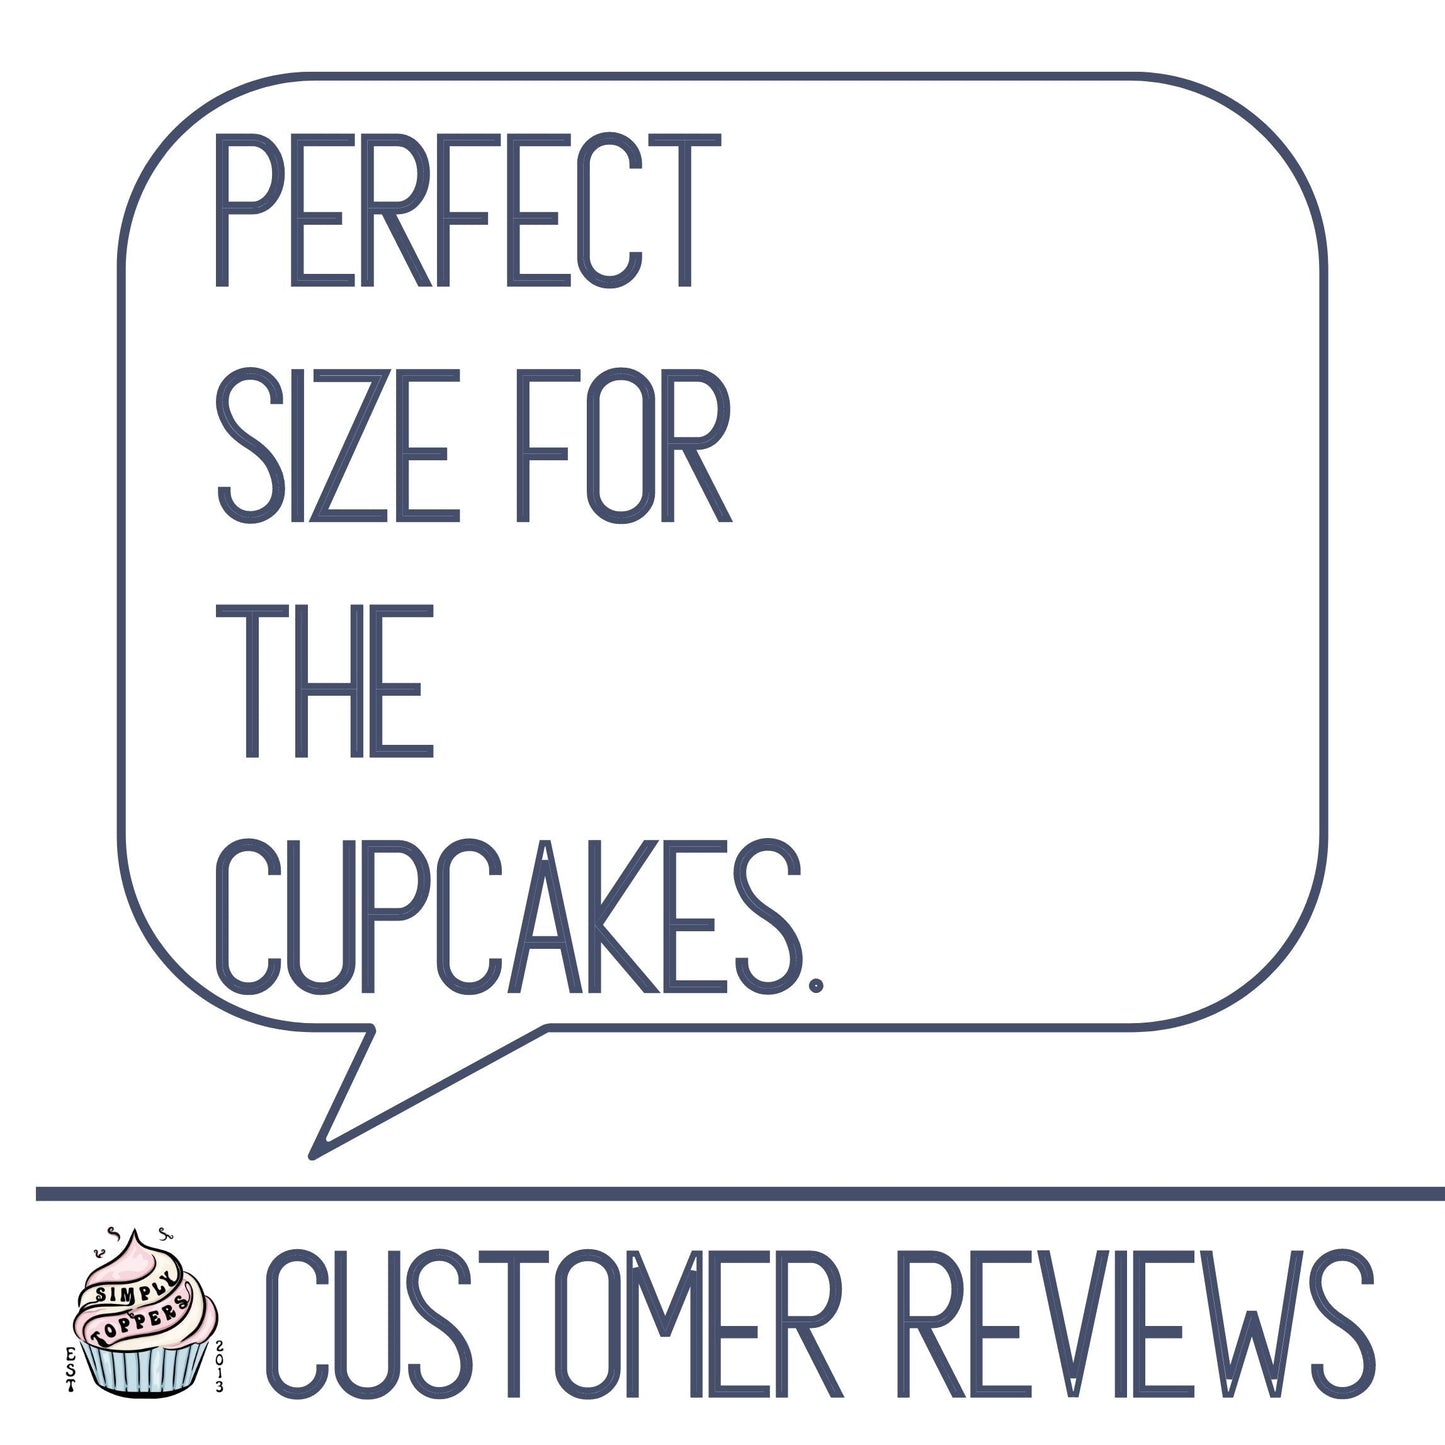 Ship Cake Toppers | Ship Cupcake Toppers